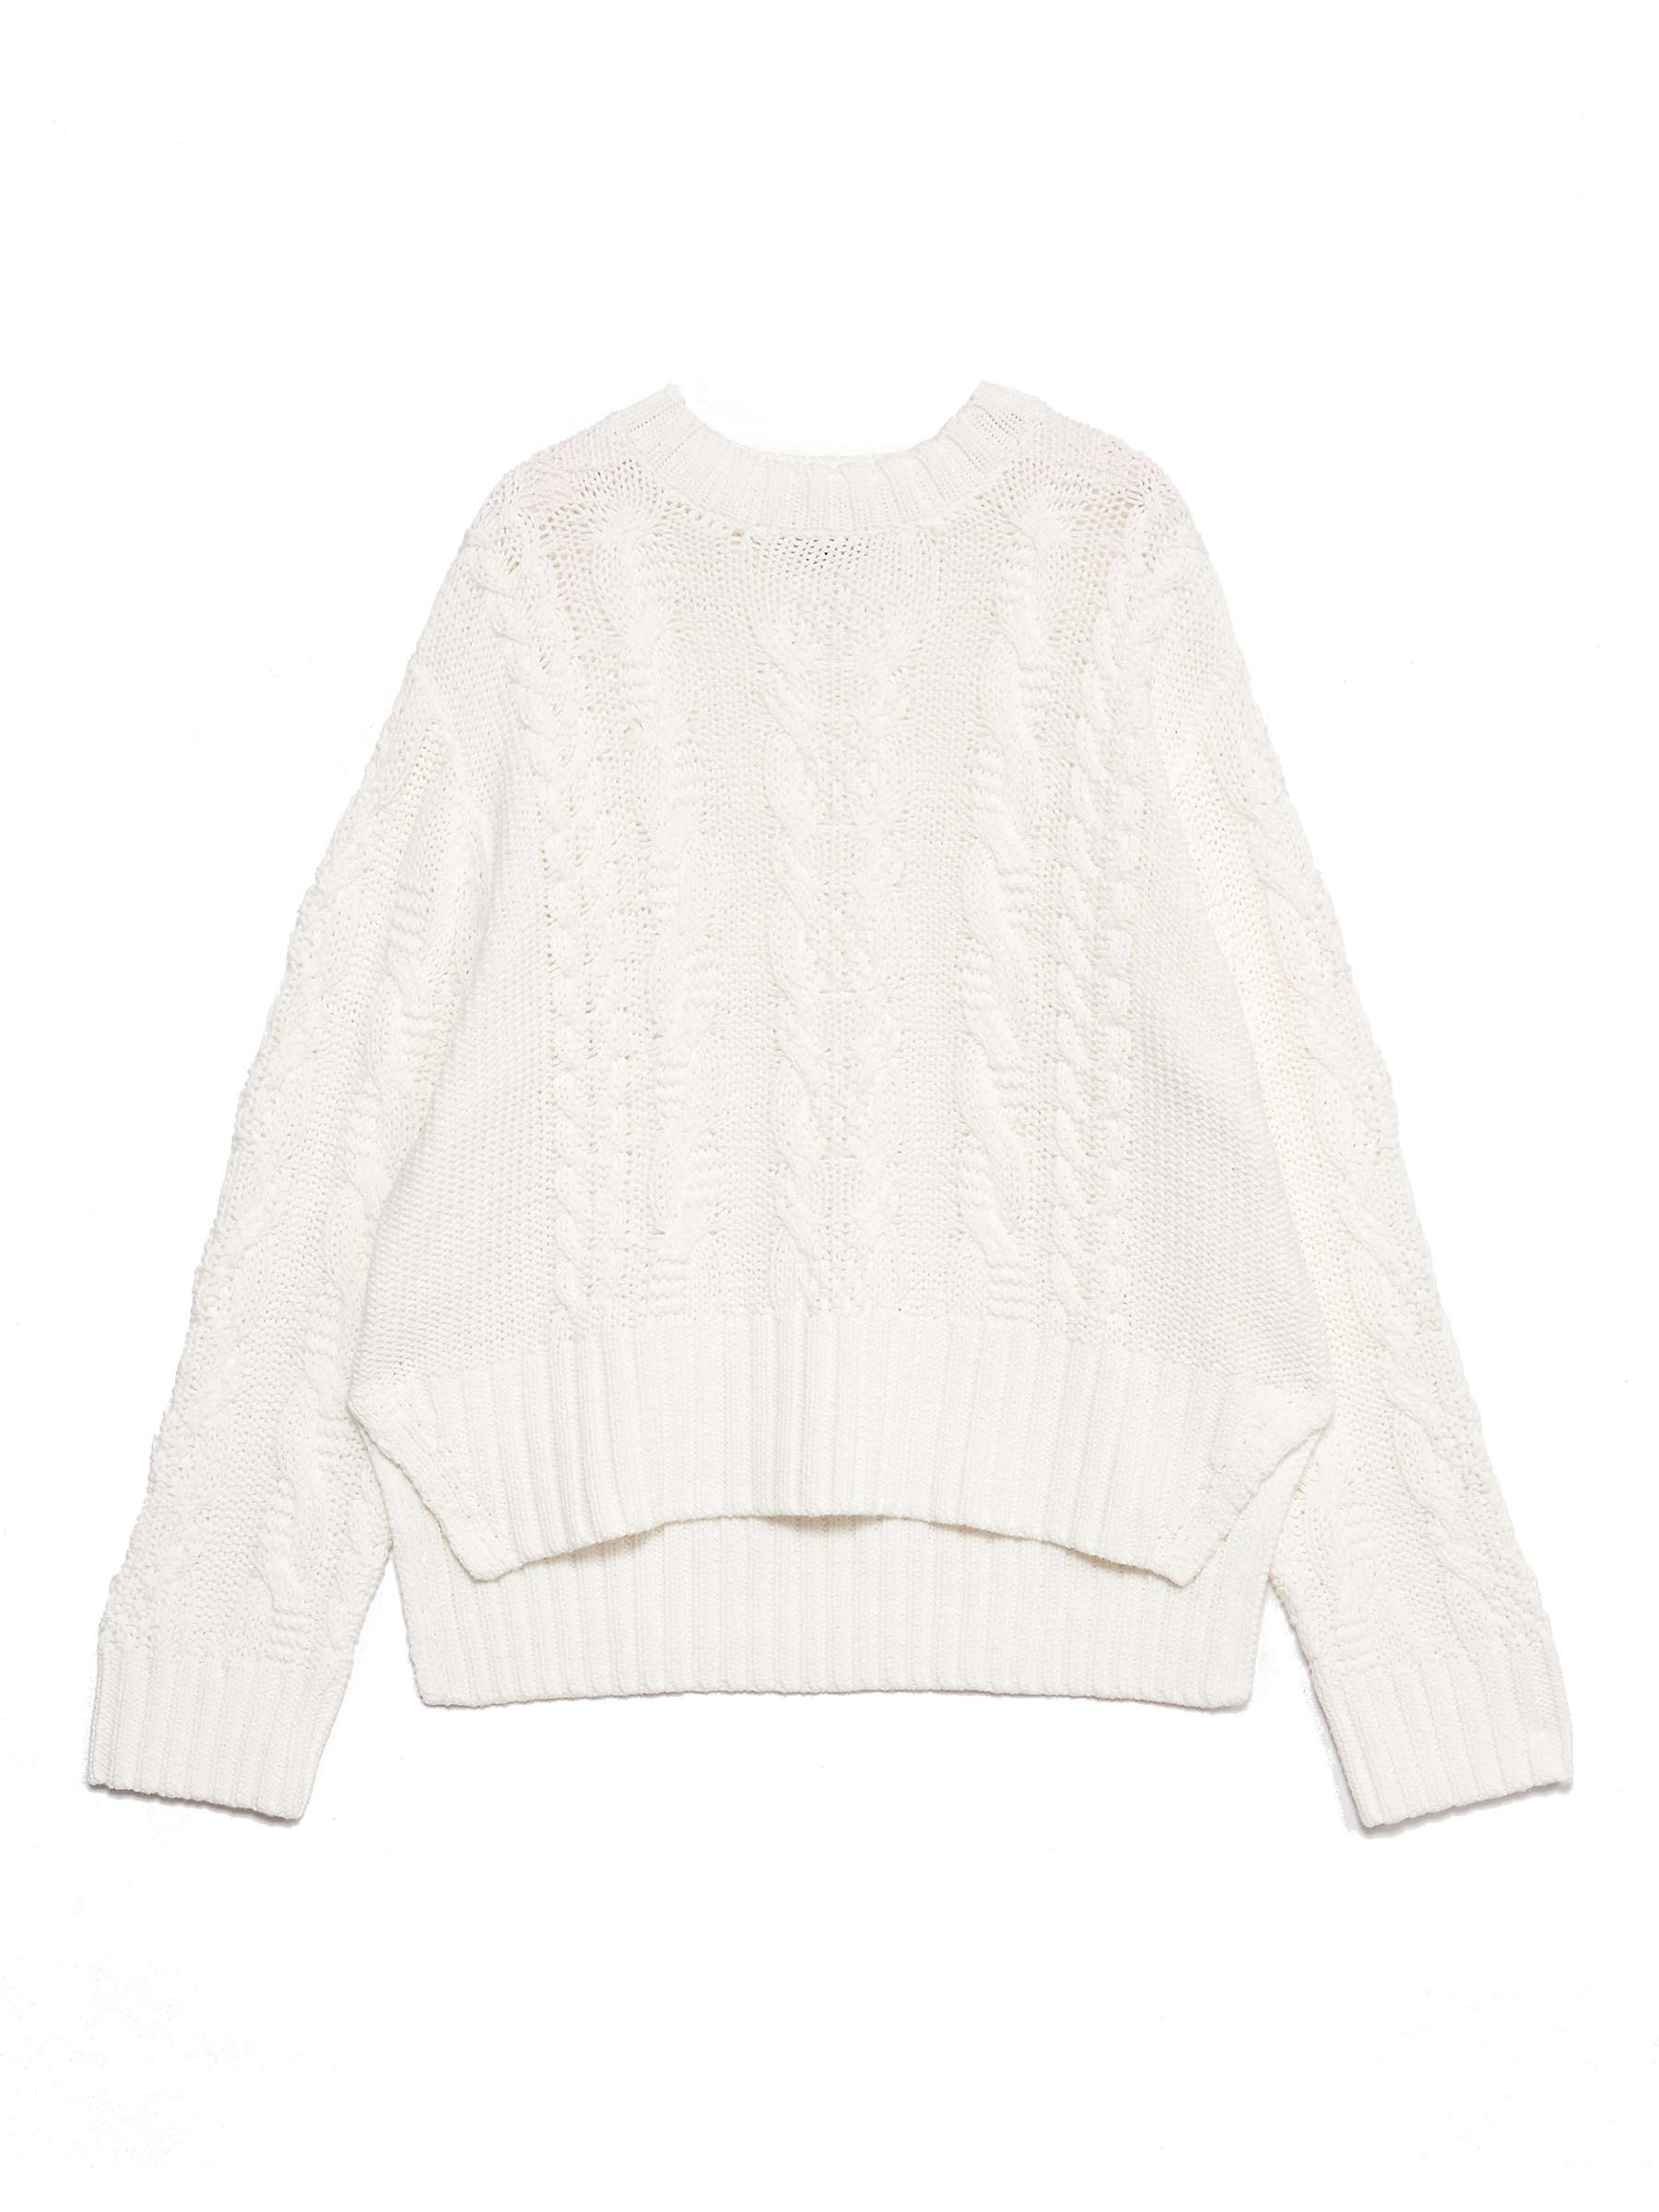 Albaray Cotton Cable Knit Jumper, Cream at John Lewis & Partners